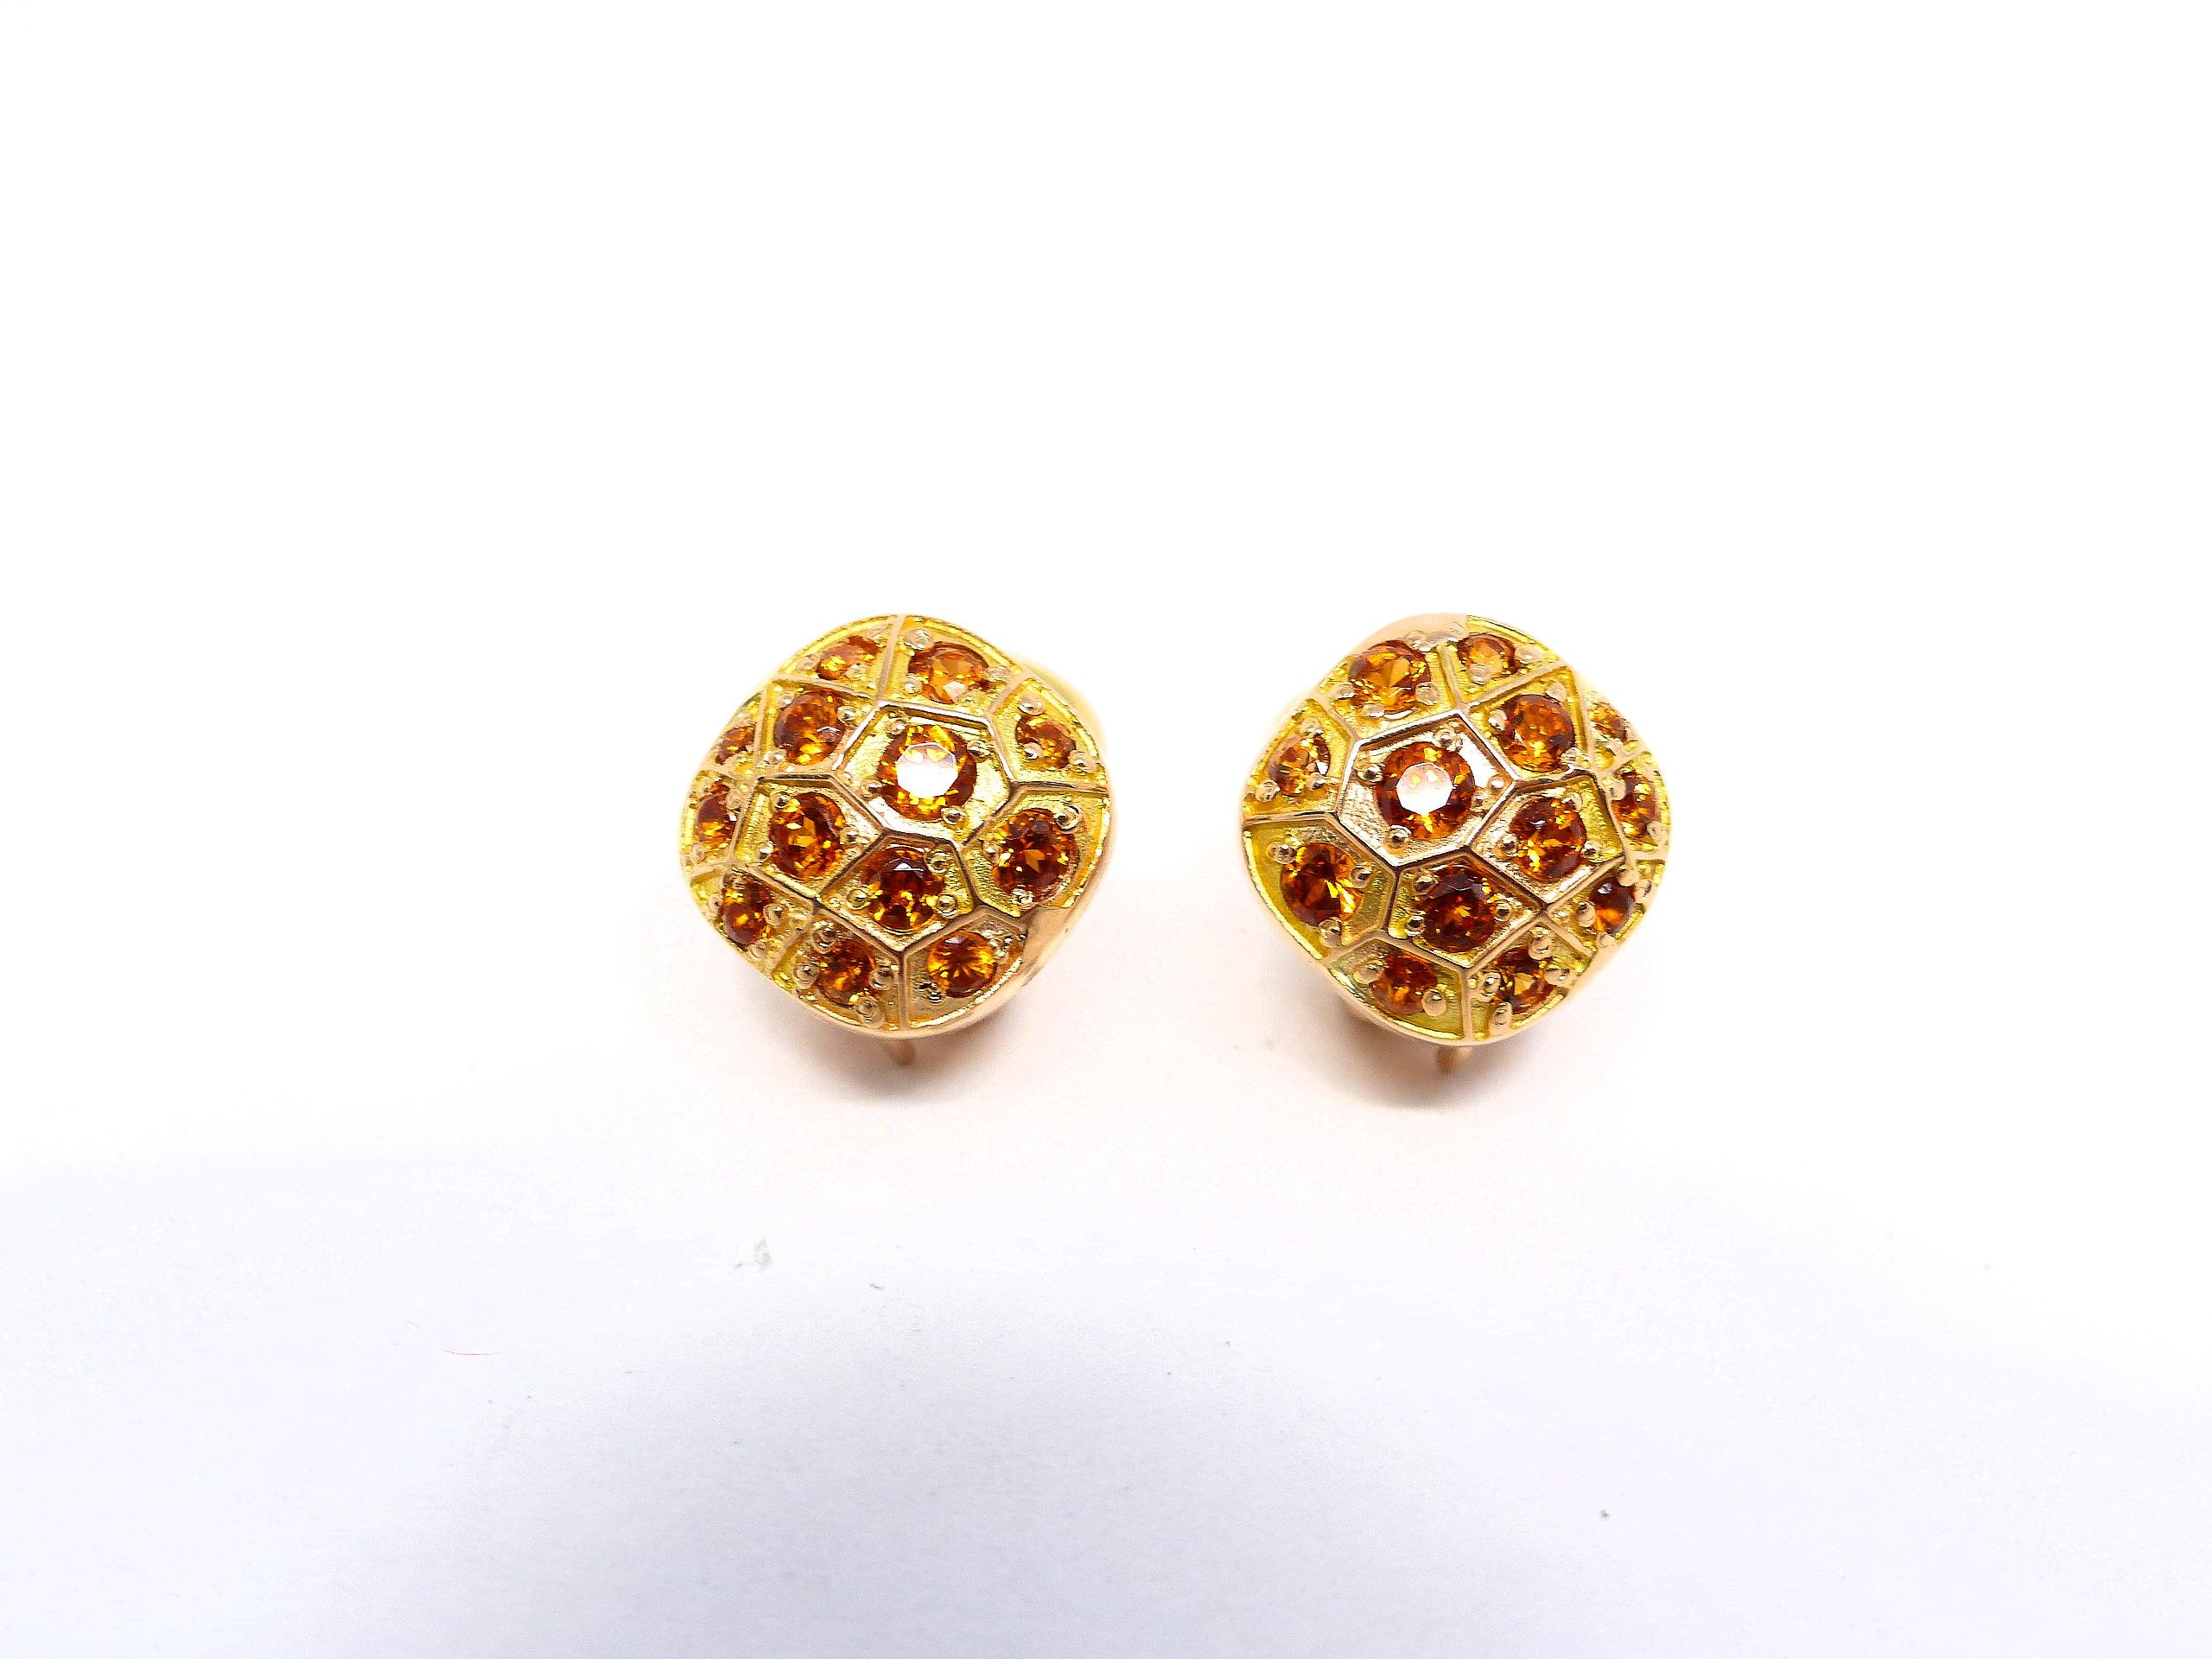 Briolette Cut Earrings in Red Gold with 2 Fire Opal Brioletts and Mandarine Garnets. For Sale